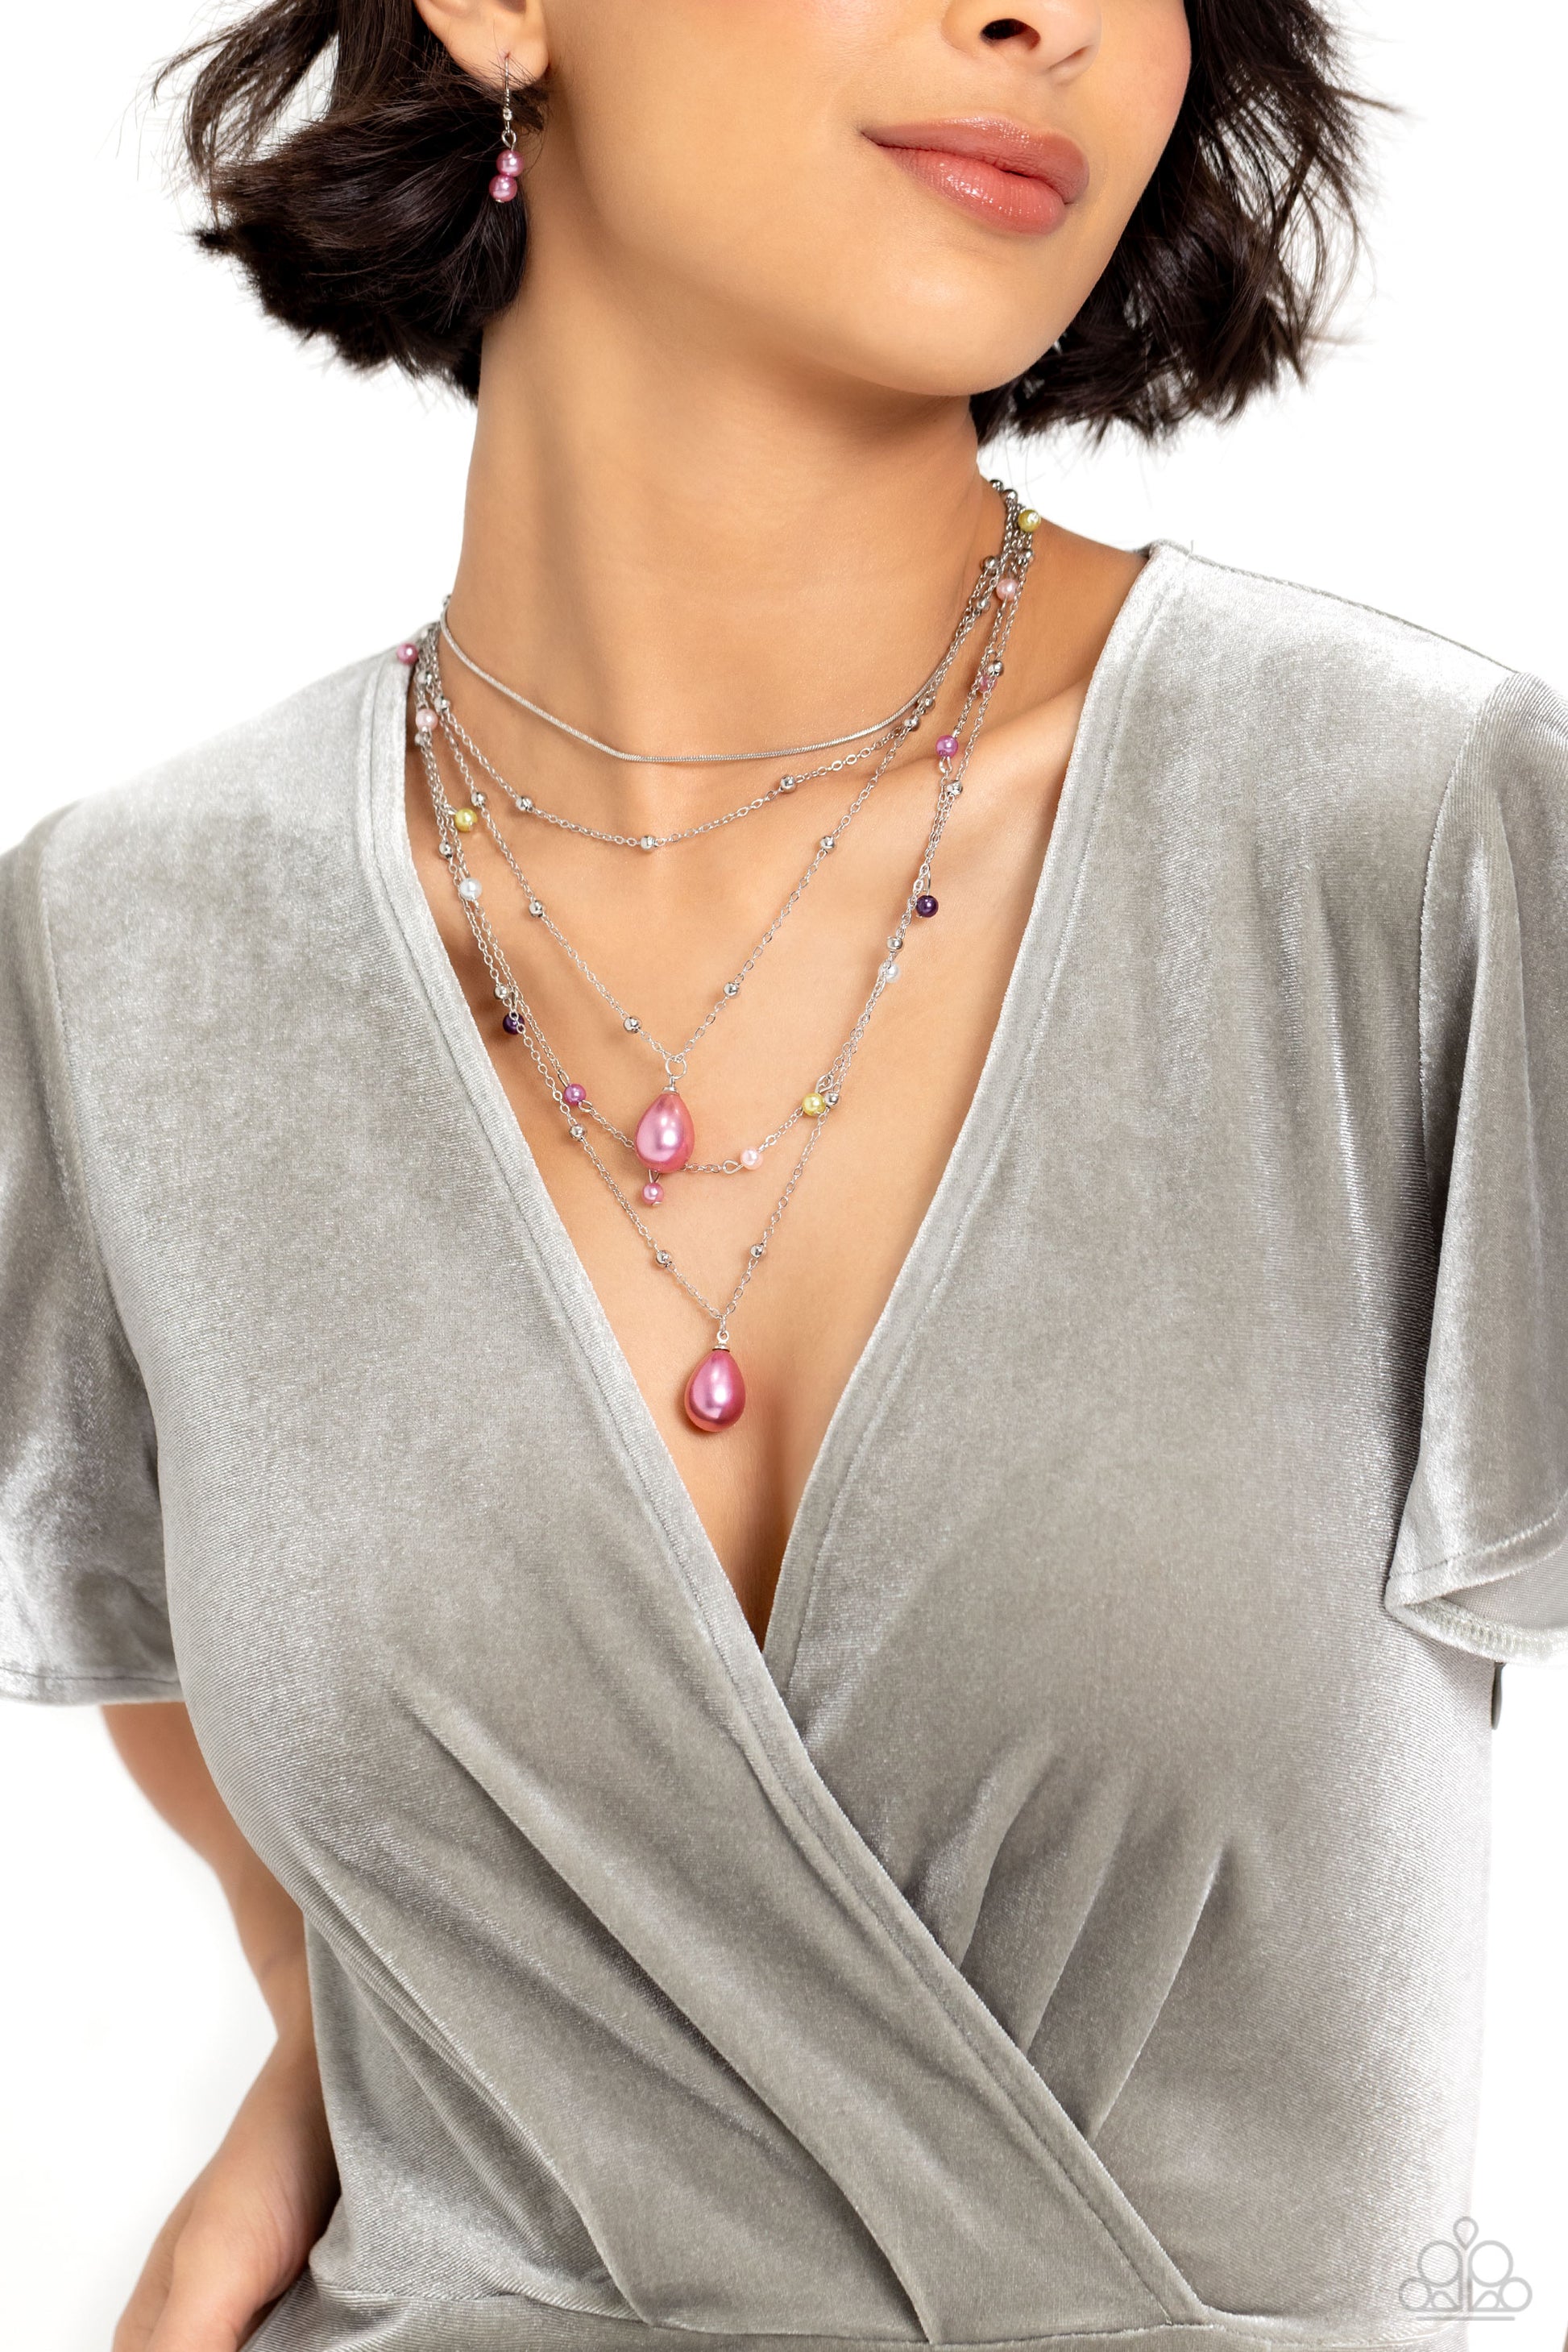 Paparazzi Accessories SASS with Flying Colors - Multi Dainty multicolored pearls and silver beads trickle along an assortment of silver chains, creating shimmery layers across the chest. Two exaggerated light orchid pearly teardrops cascade from the botto